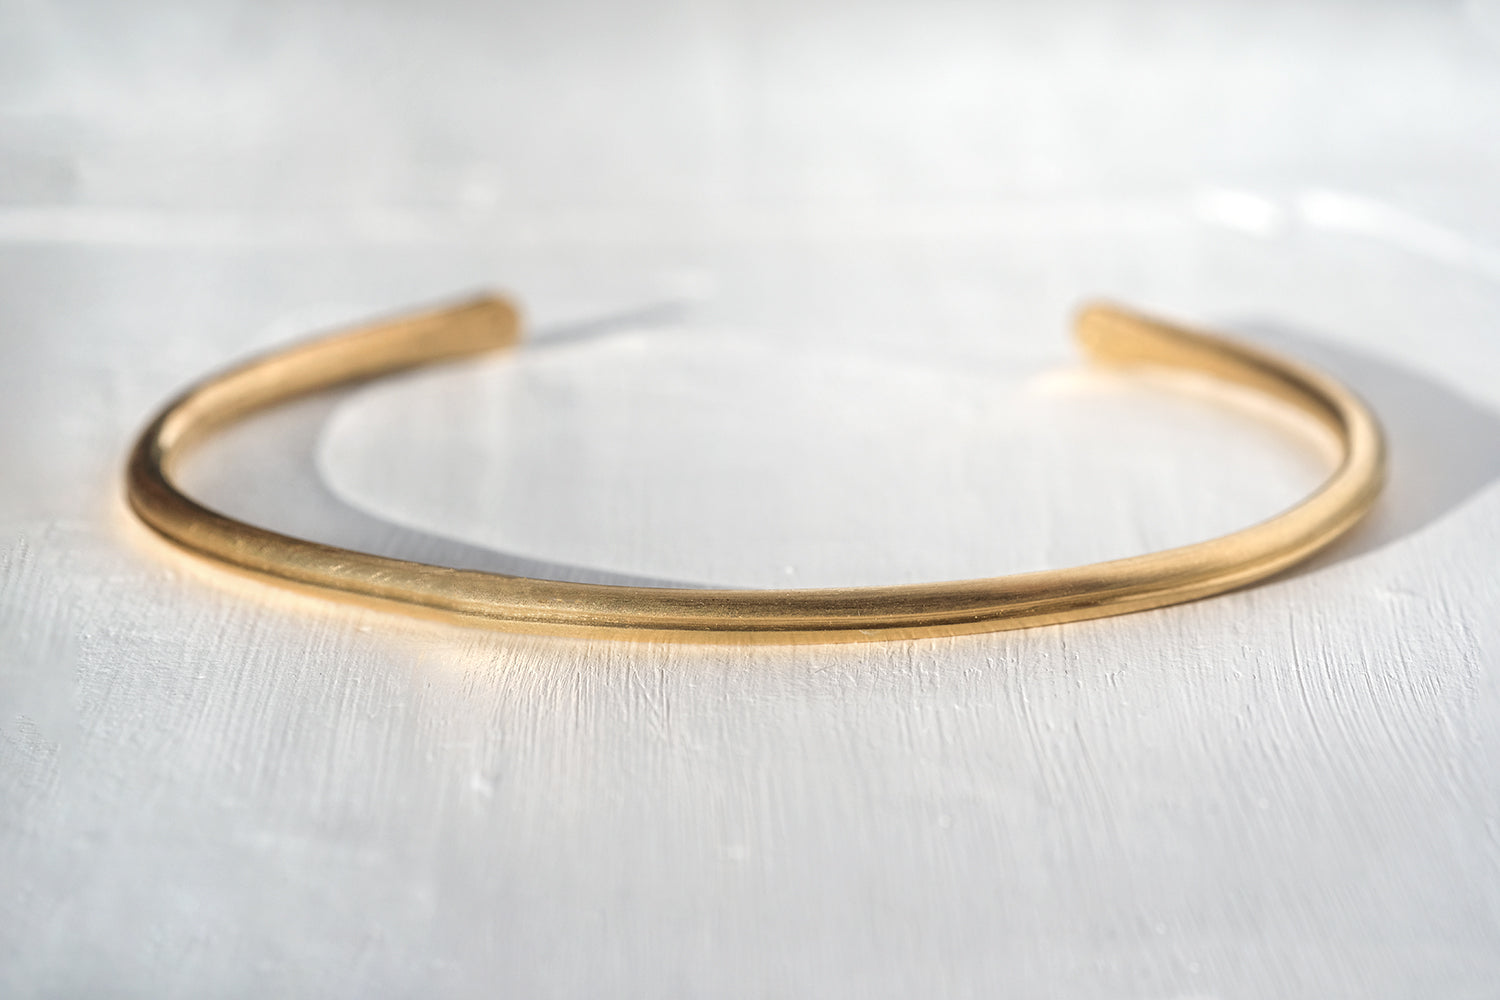 Thin Gold Bracelet For Men - With A Central Line